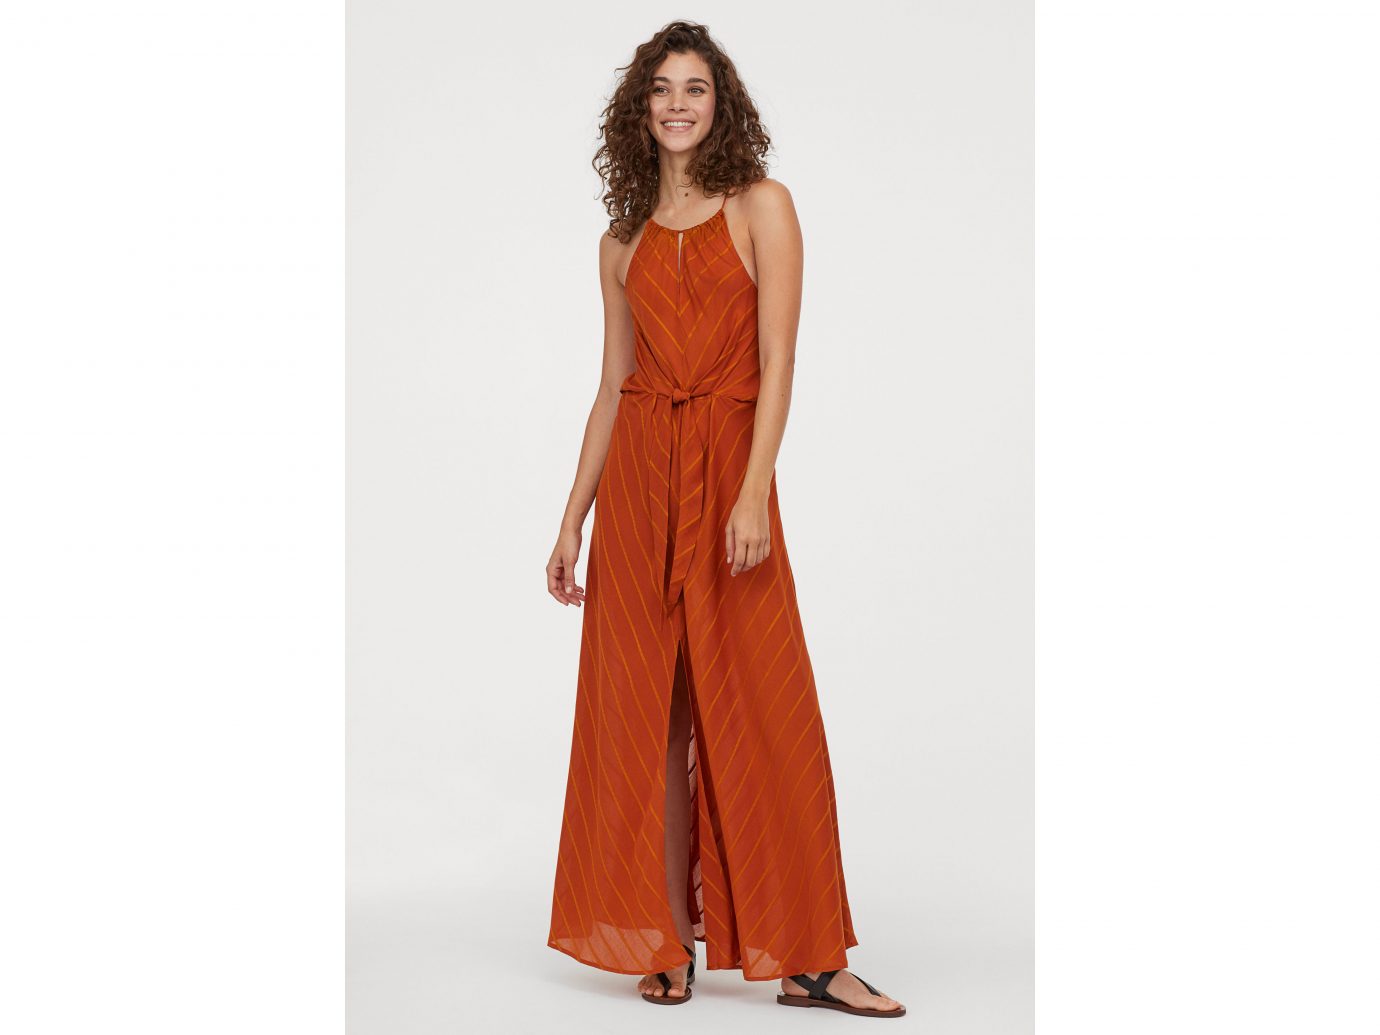 H&M’s Conscious striped maxi dress in red and orange